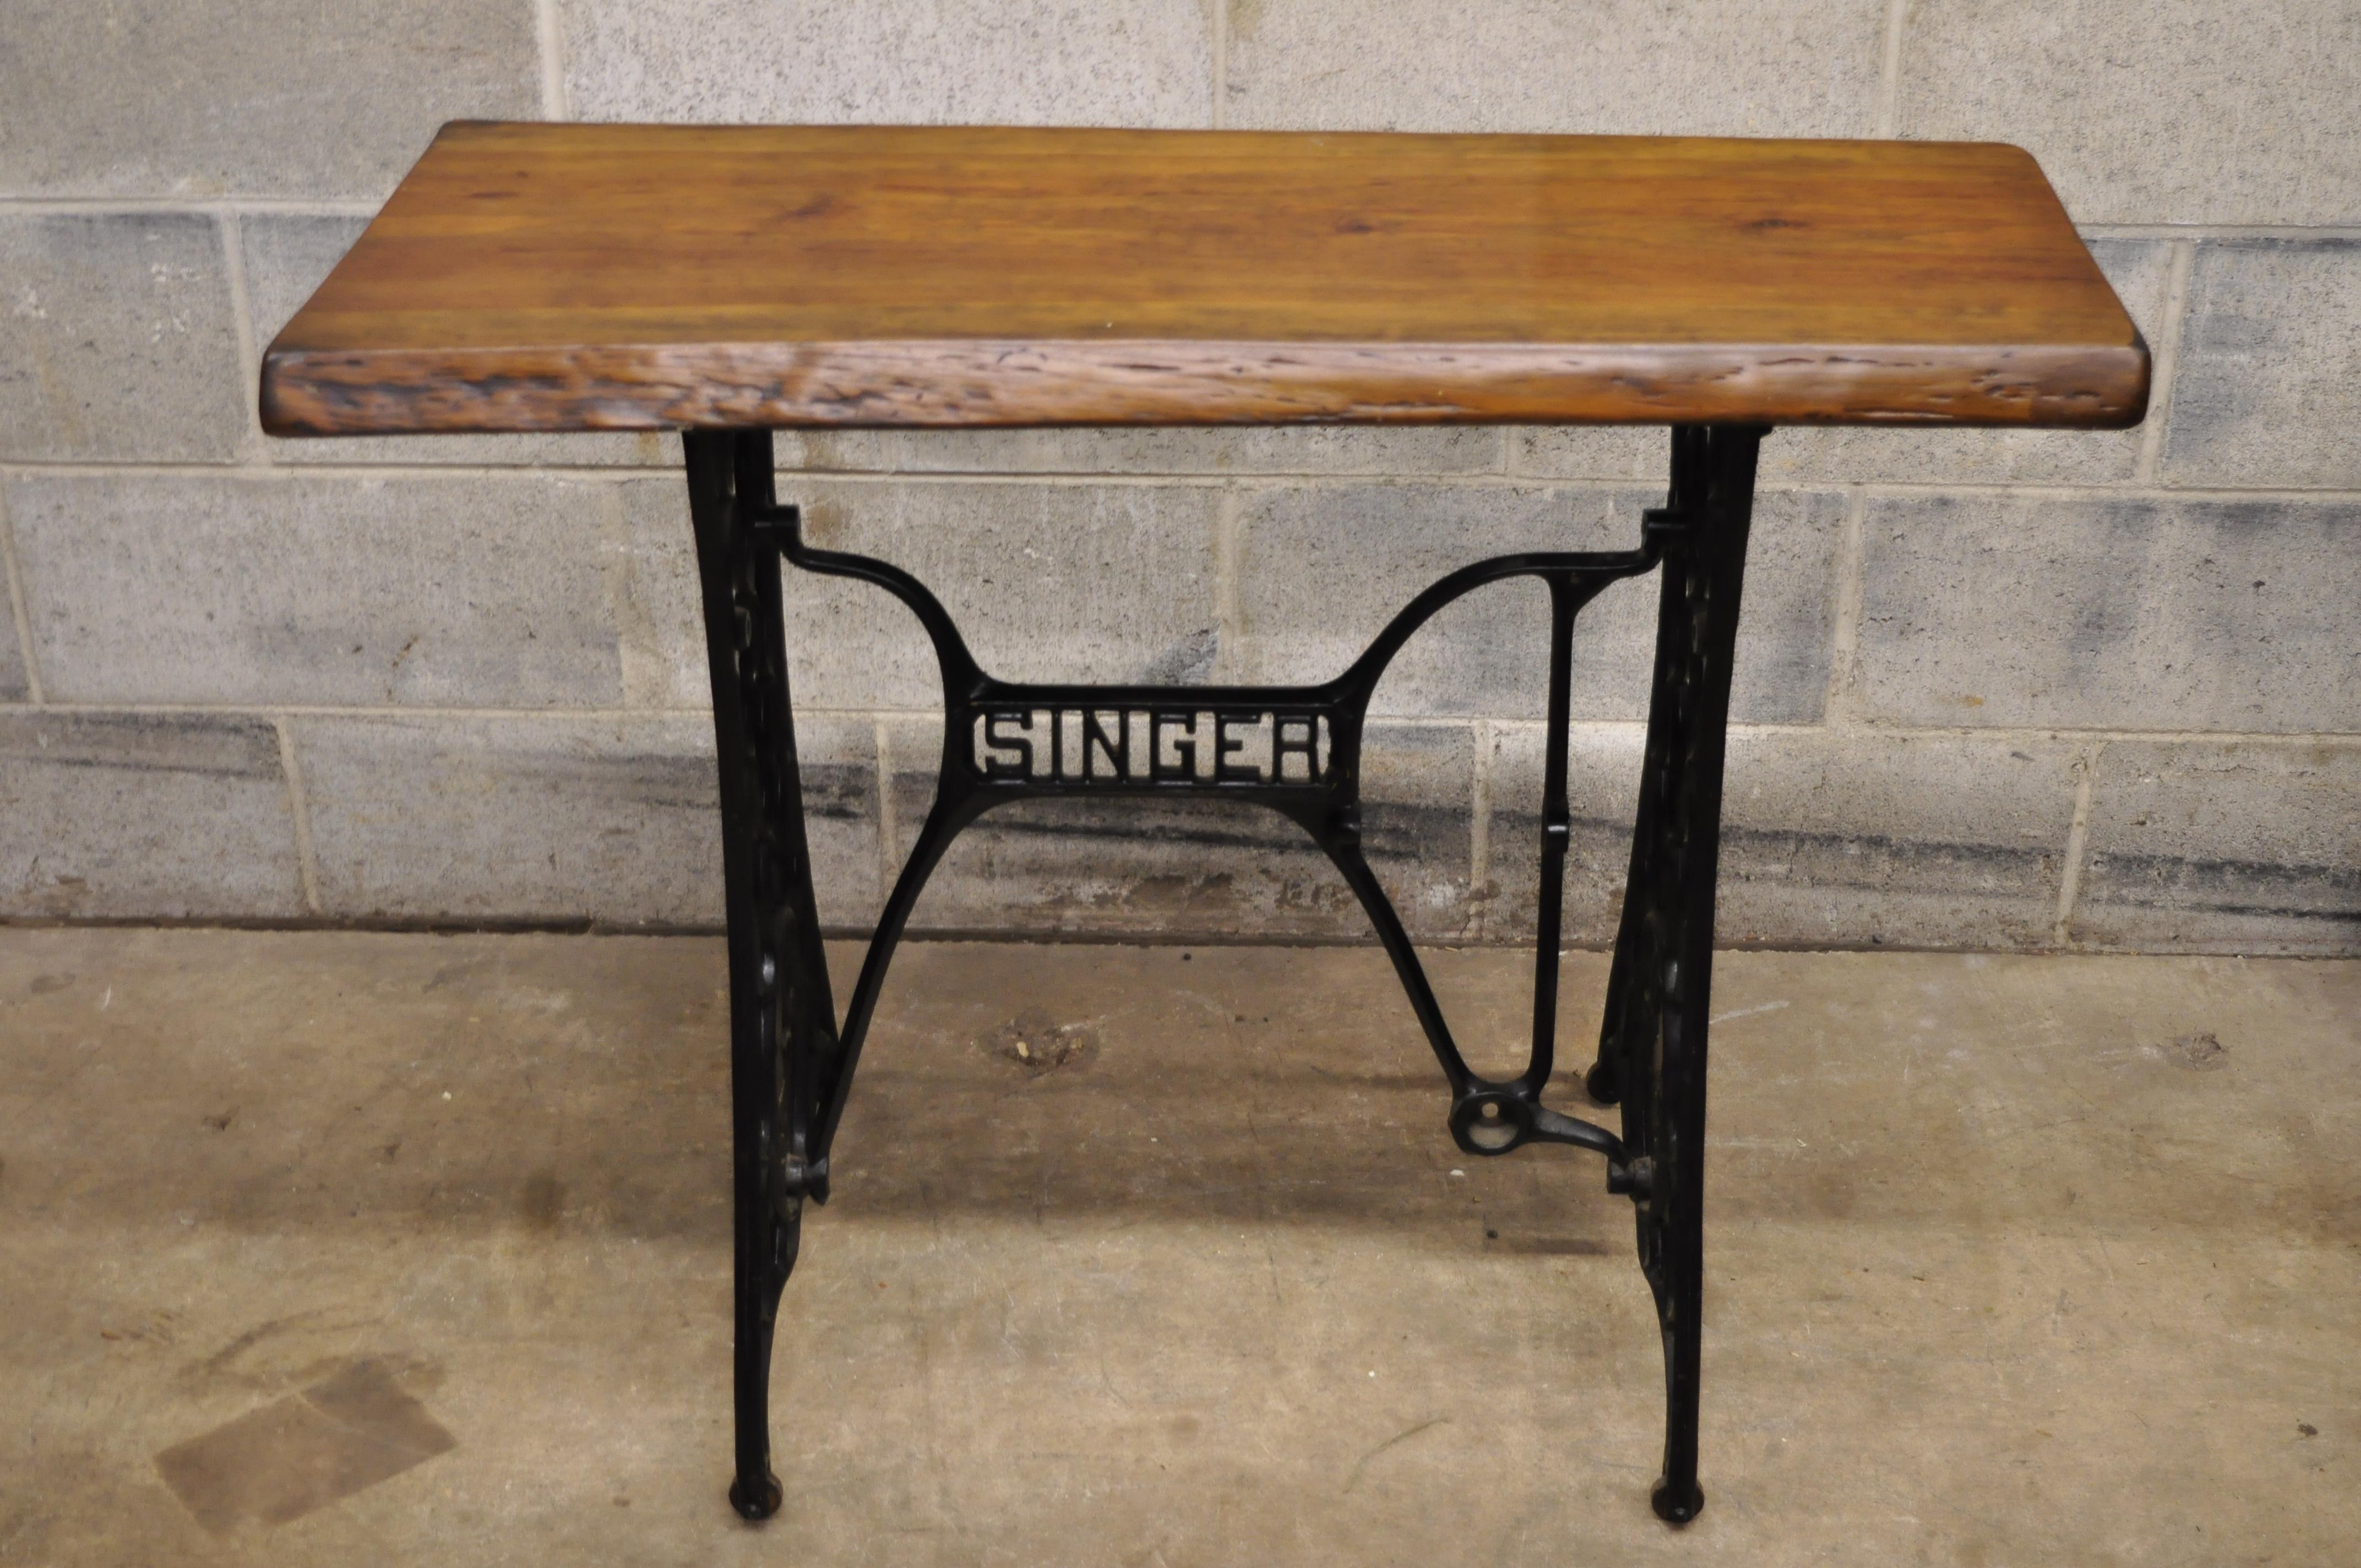 Antique singer cast iron Victorian sewing machine base console desk live edge slab top. Item features live edge wood slab top, cast iron singer base, beautiful wood grain, quality American craftsmanship, great style and form, circa early 1900s.